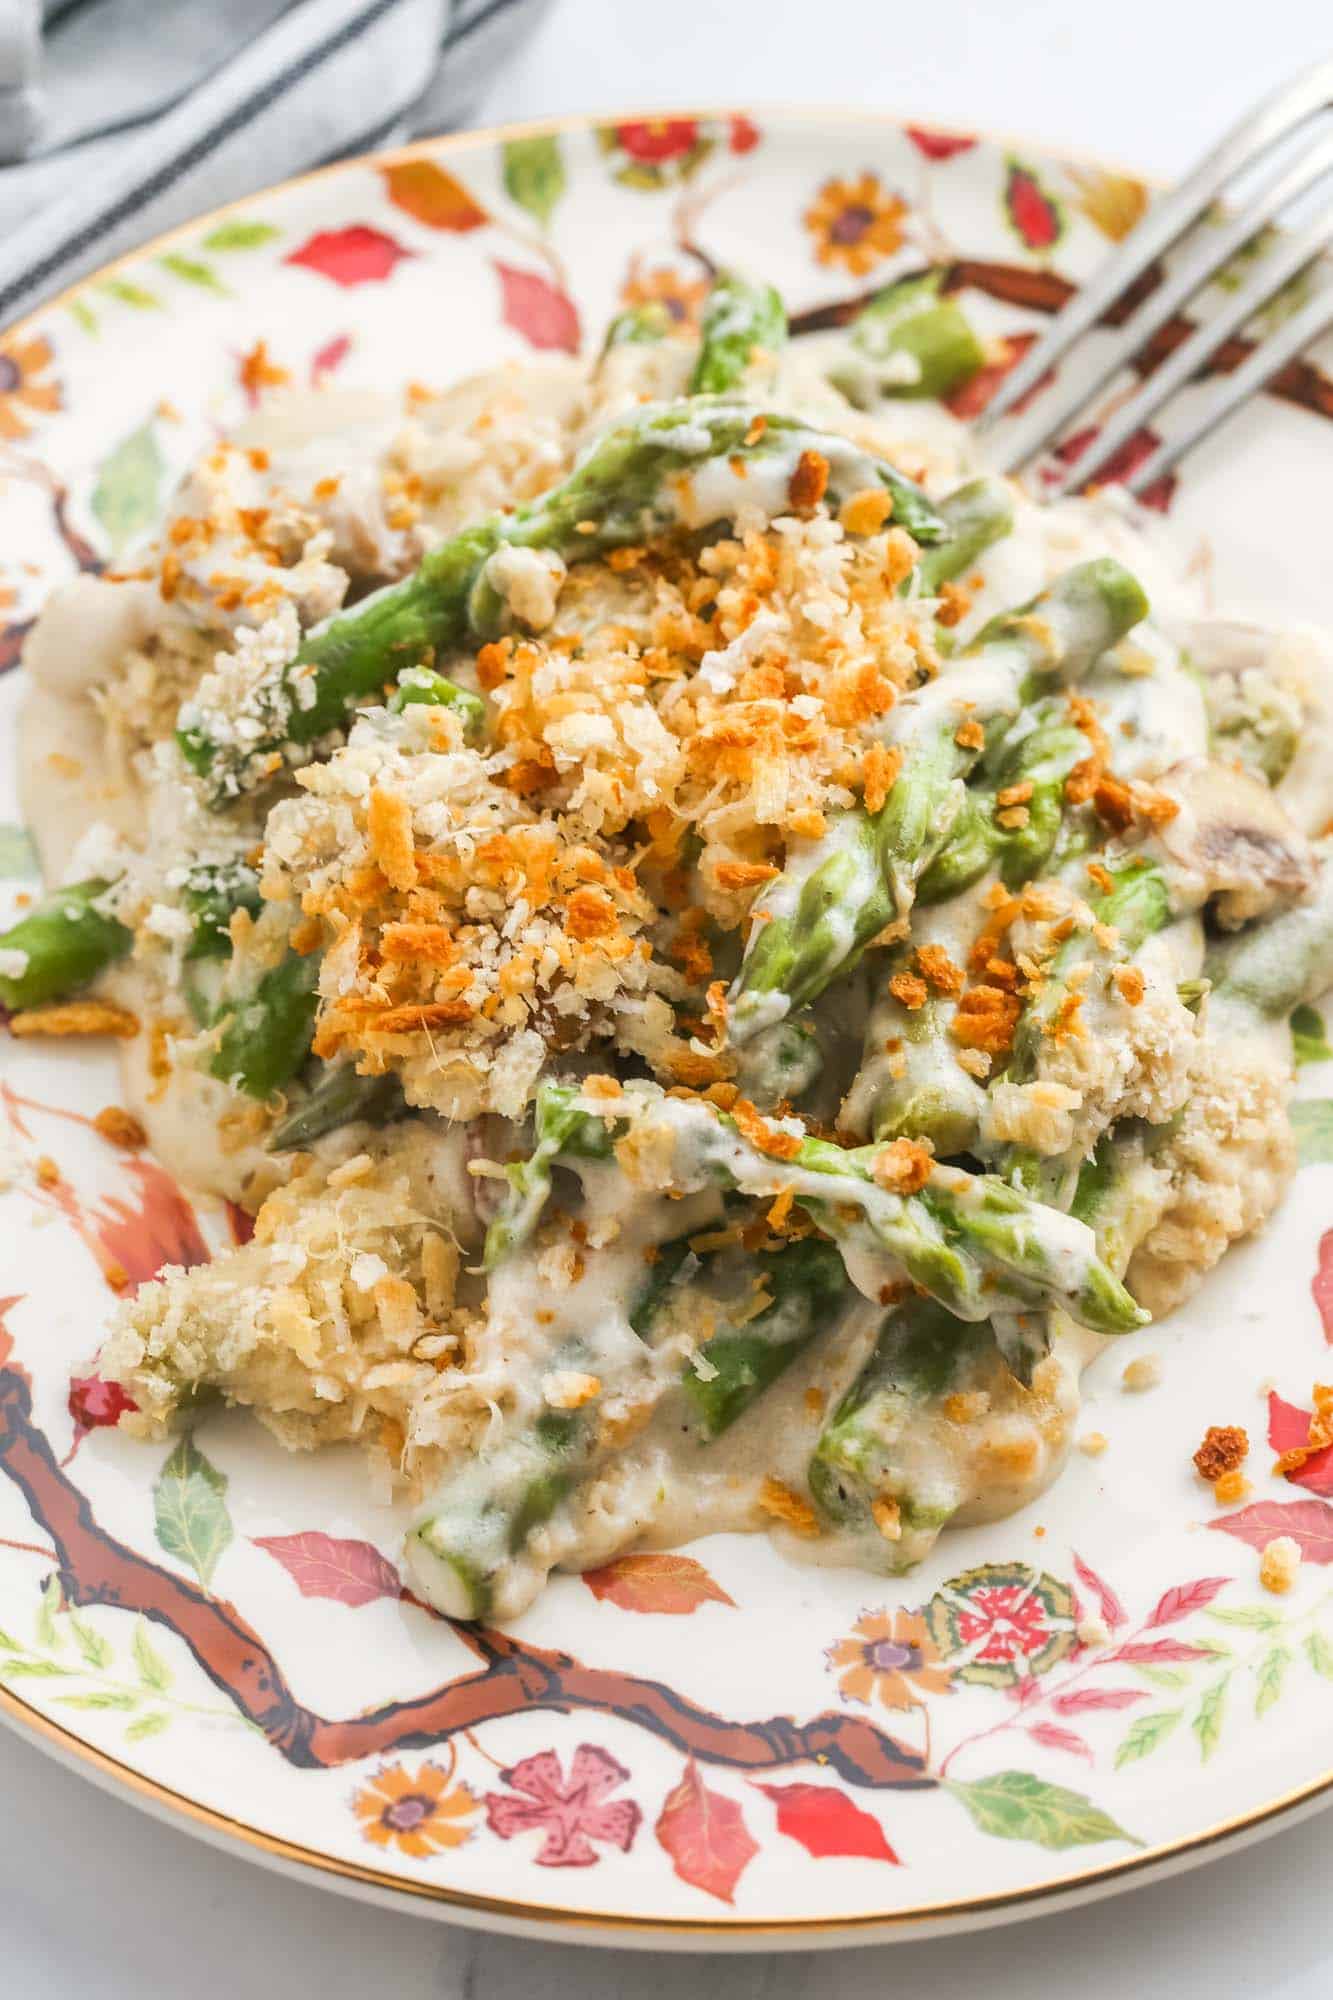 a serving of cheesy asparagus bake on a patterned plate. A fork is on the edge of the plate.